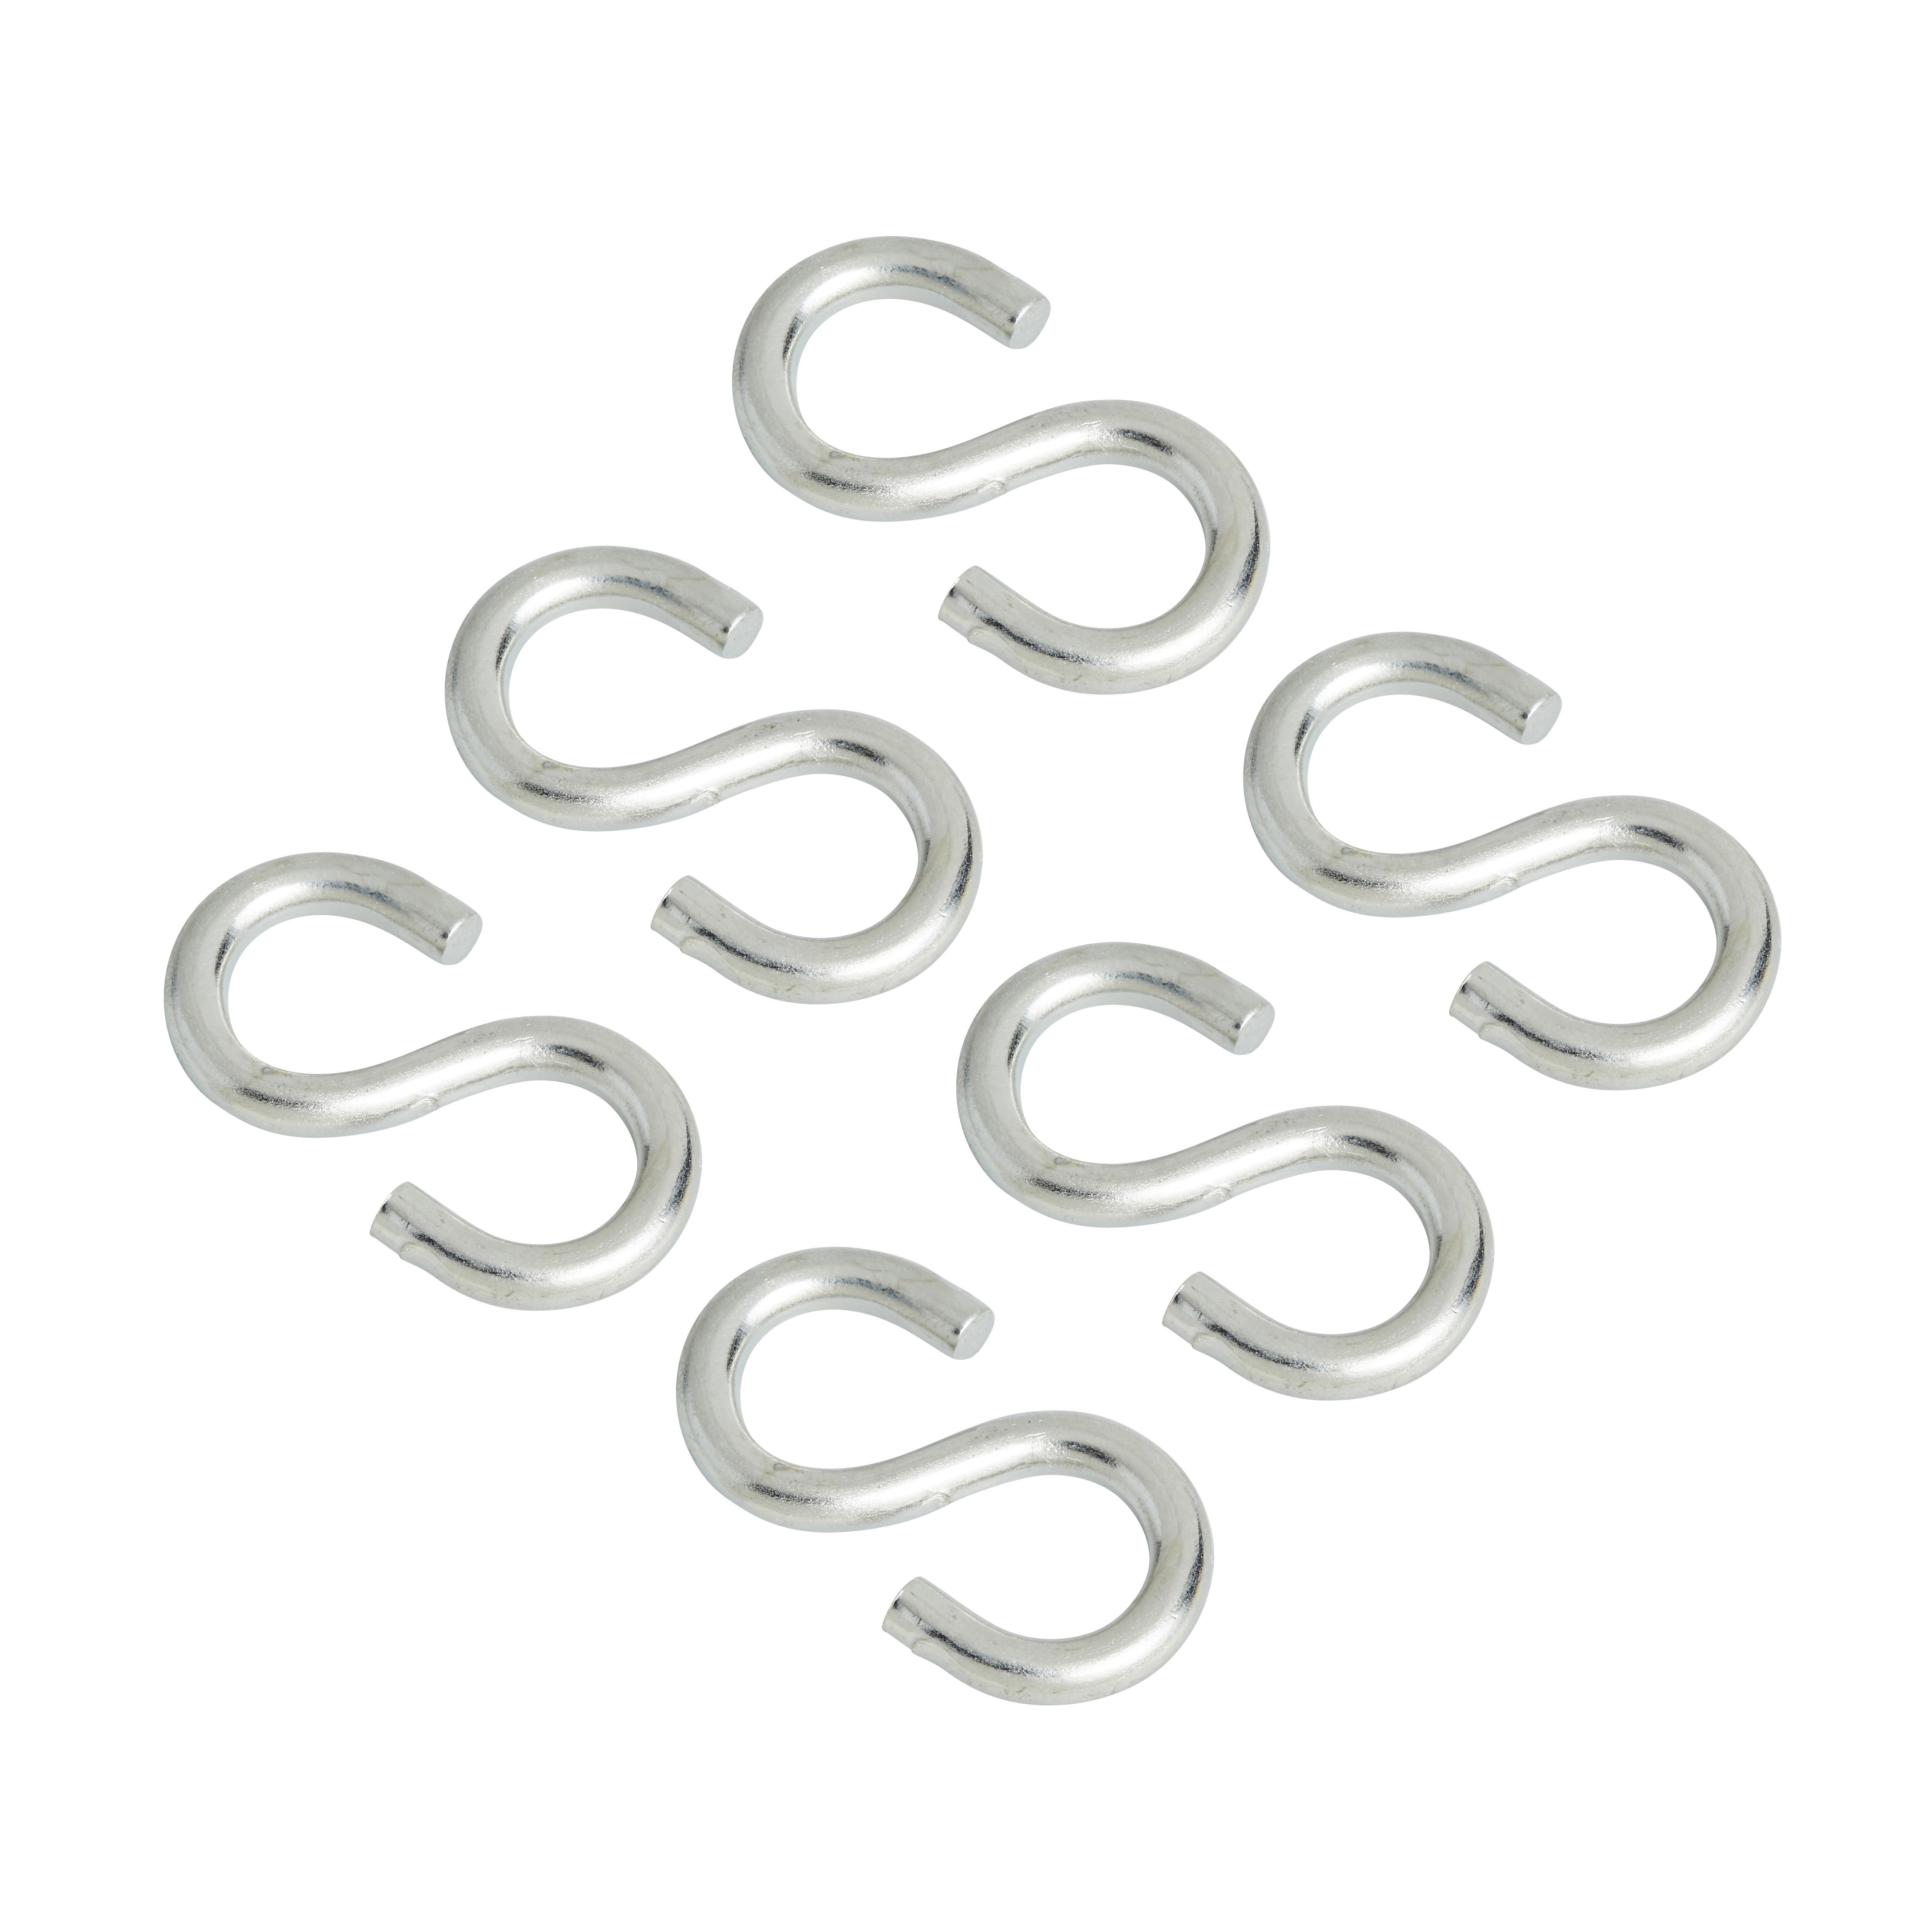 Diall Zinc-plated Steel S-hook (L)30mm, Pack of 6